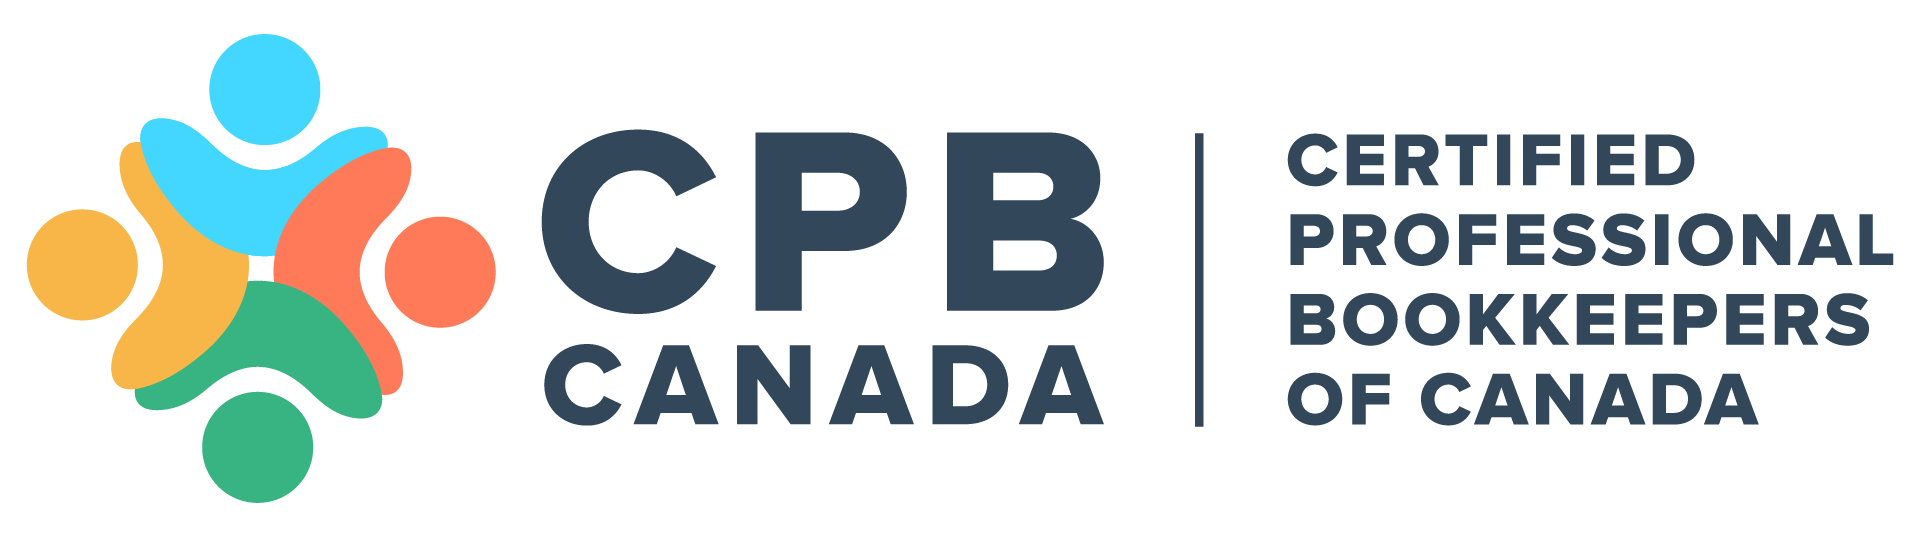 certified professional bookkeepers of canada CPB canada logo